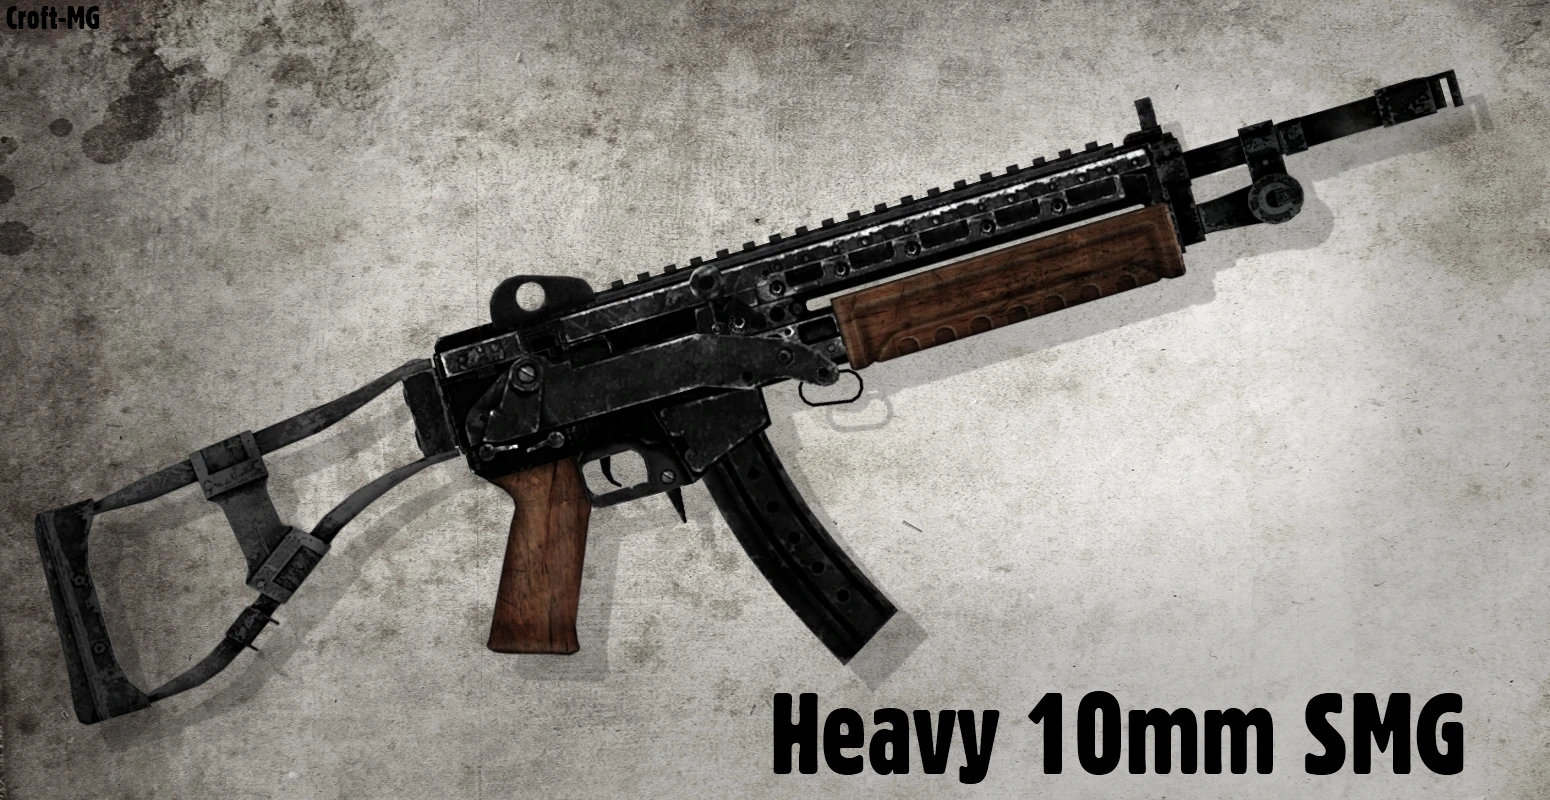 Heavy 10mm SMG.